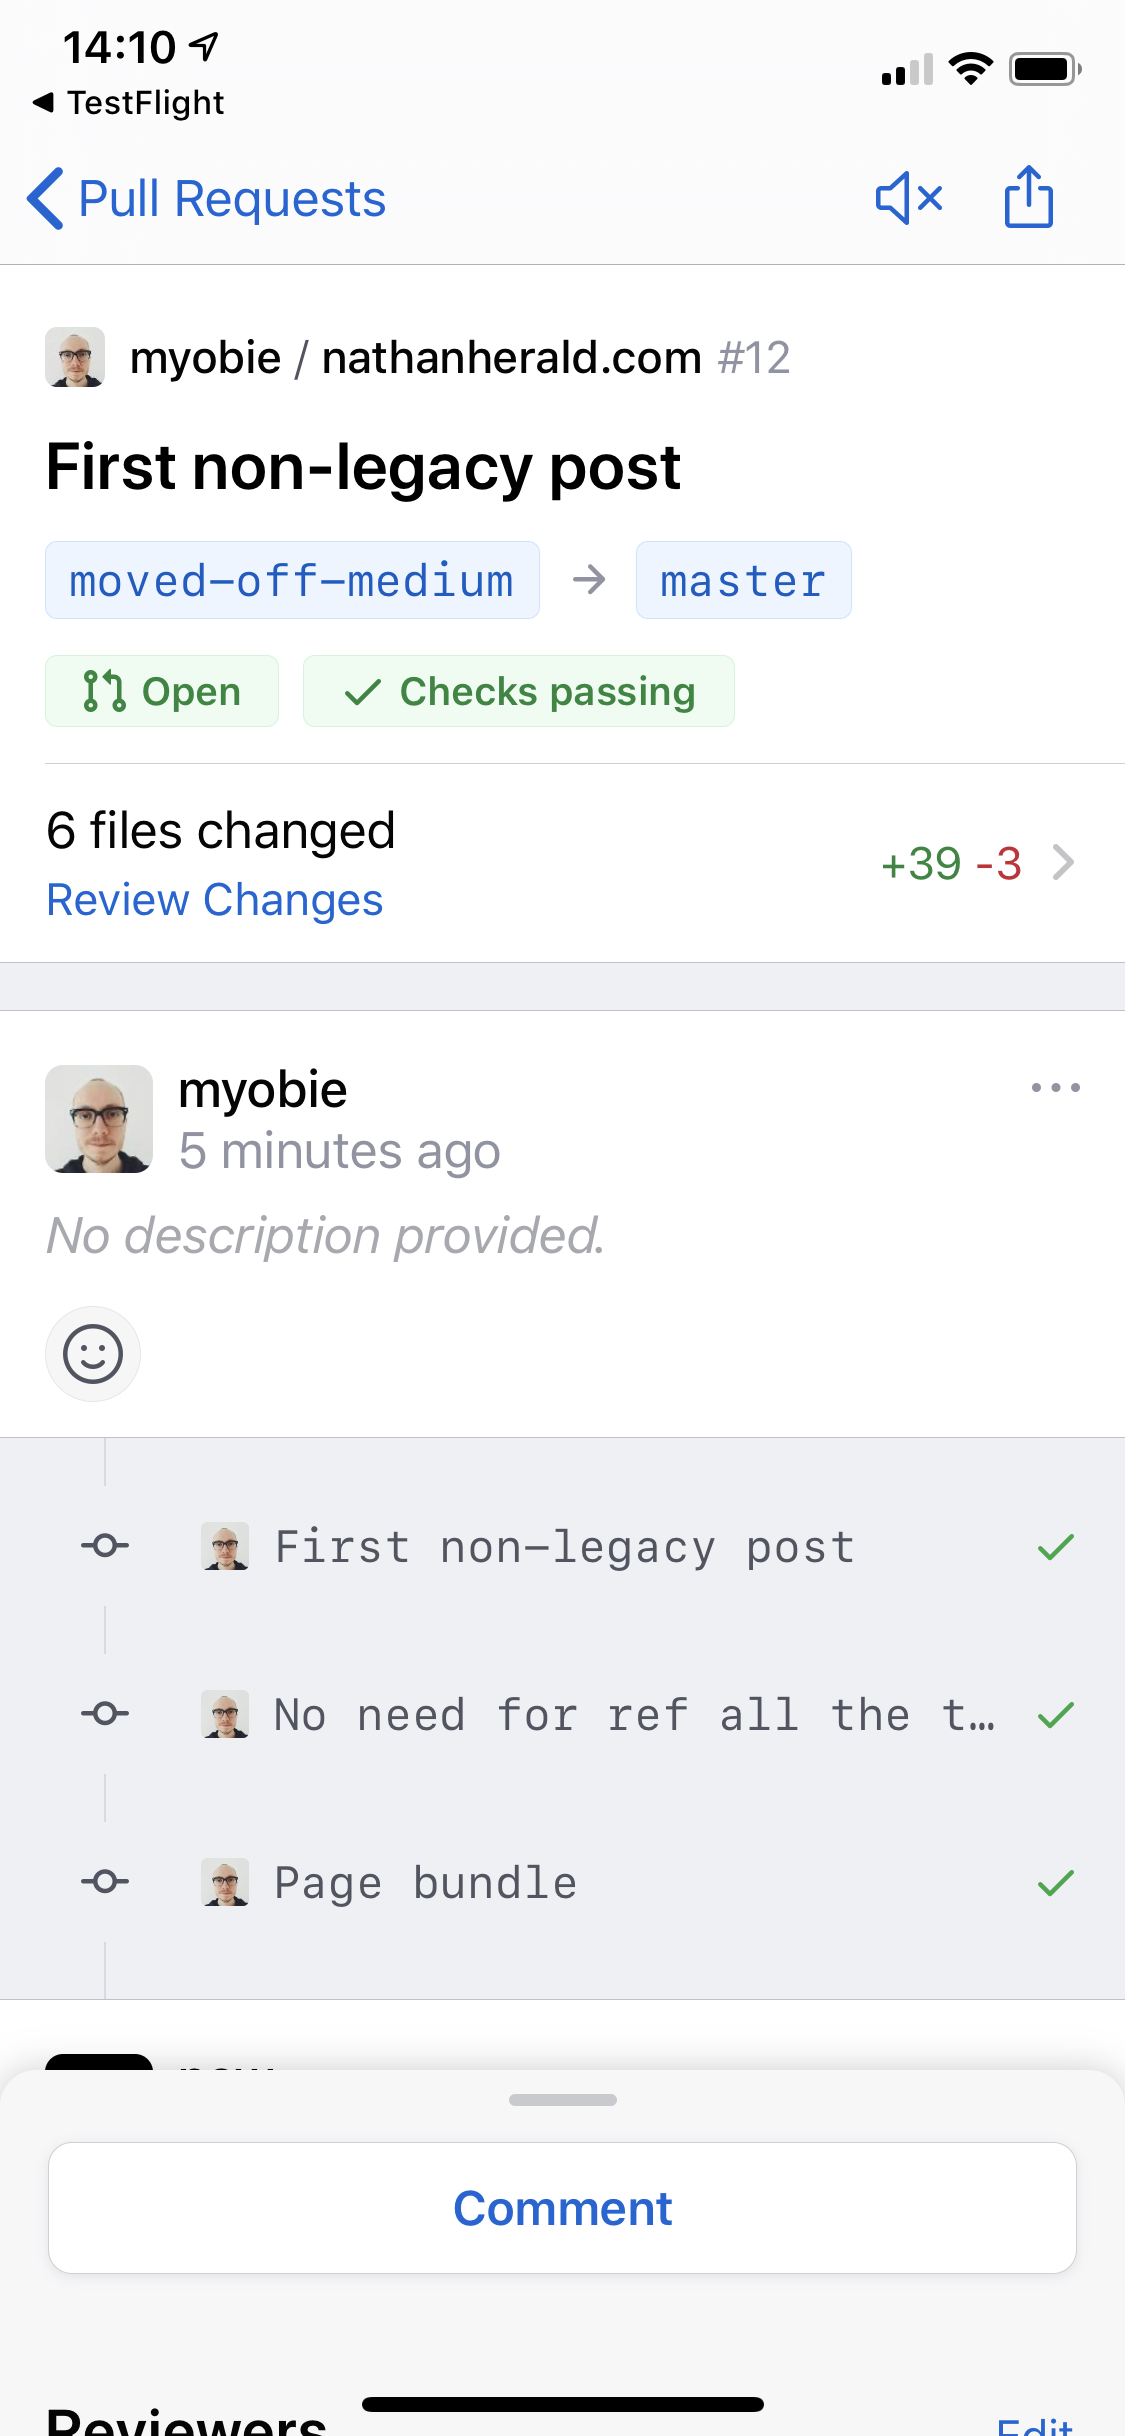 Screenshot of the GitHub Mobile app showing the Pull Request for this post